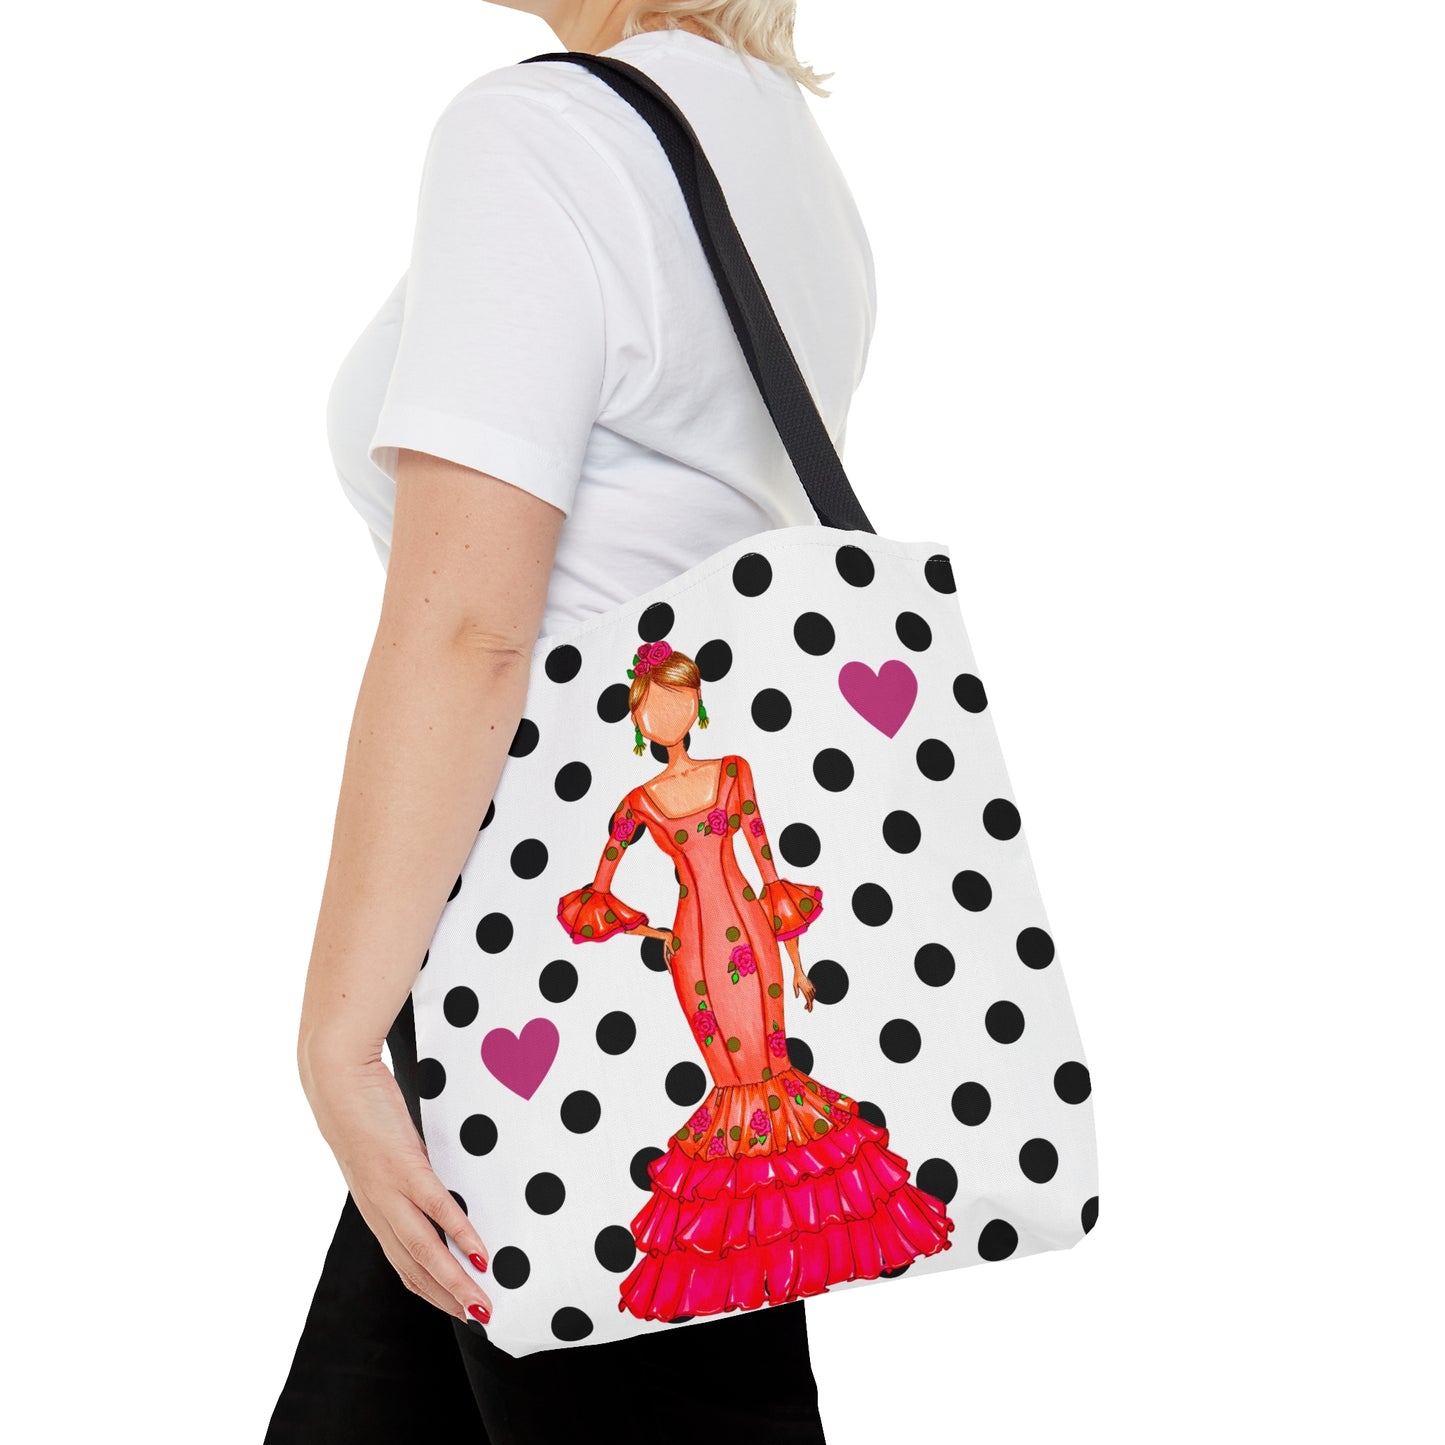 a woman is carrying a polka dot purse